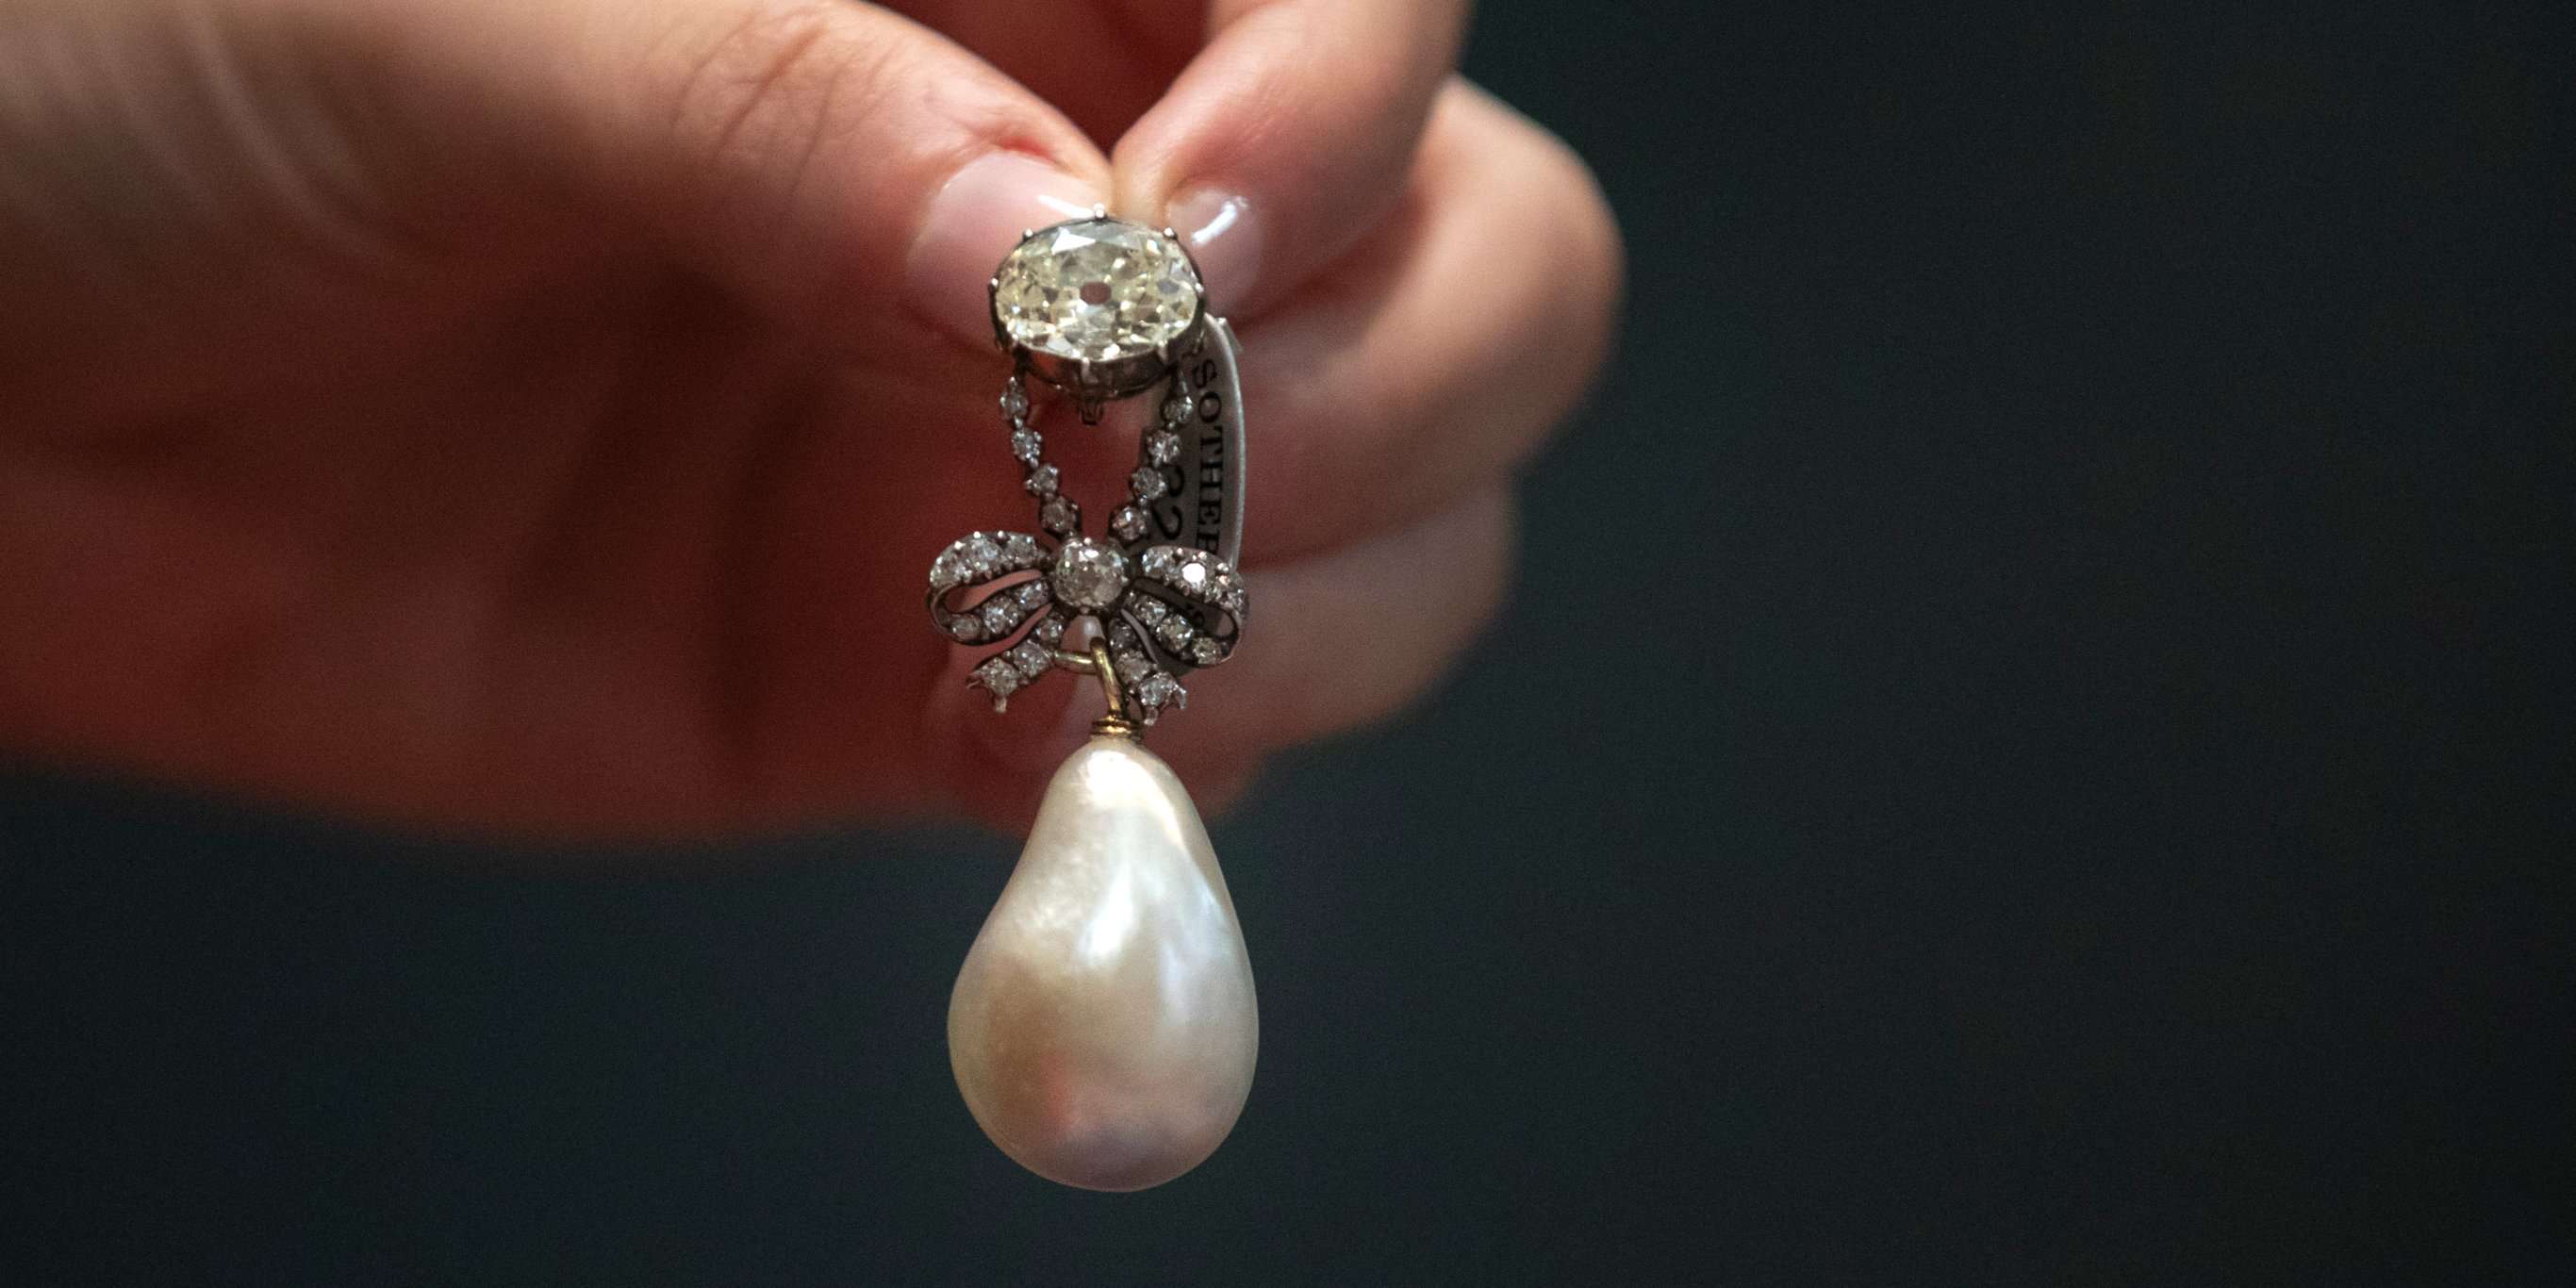 Taboola Ad Example 66058 - Marie Antoinette's Pearl Pendant Sold For A Record-breaking $32 Million. Here's Why Pearls Are So Expensive.